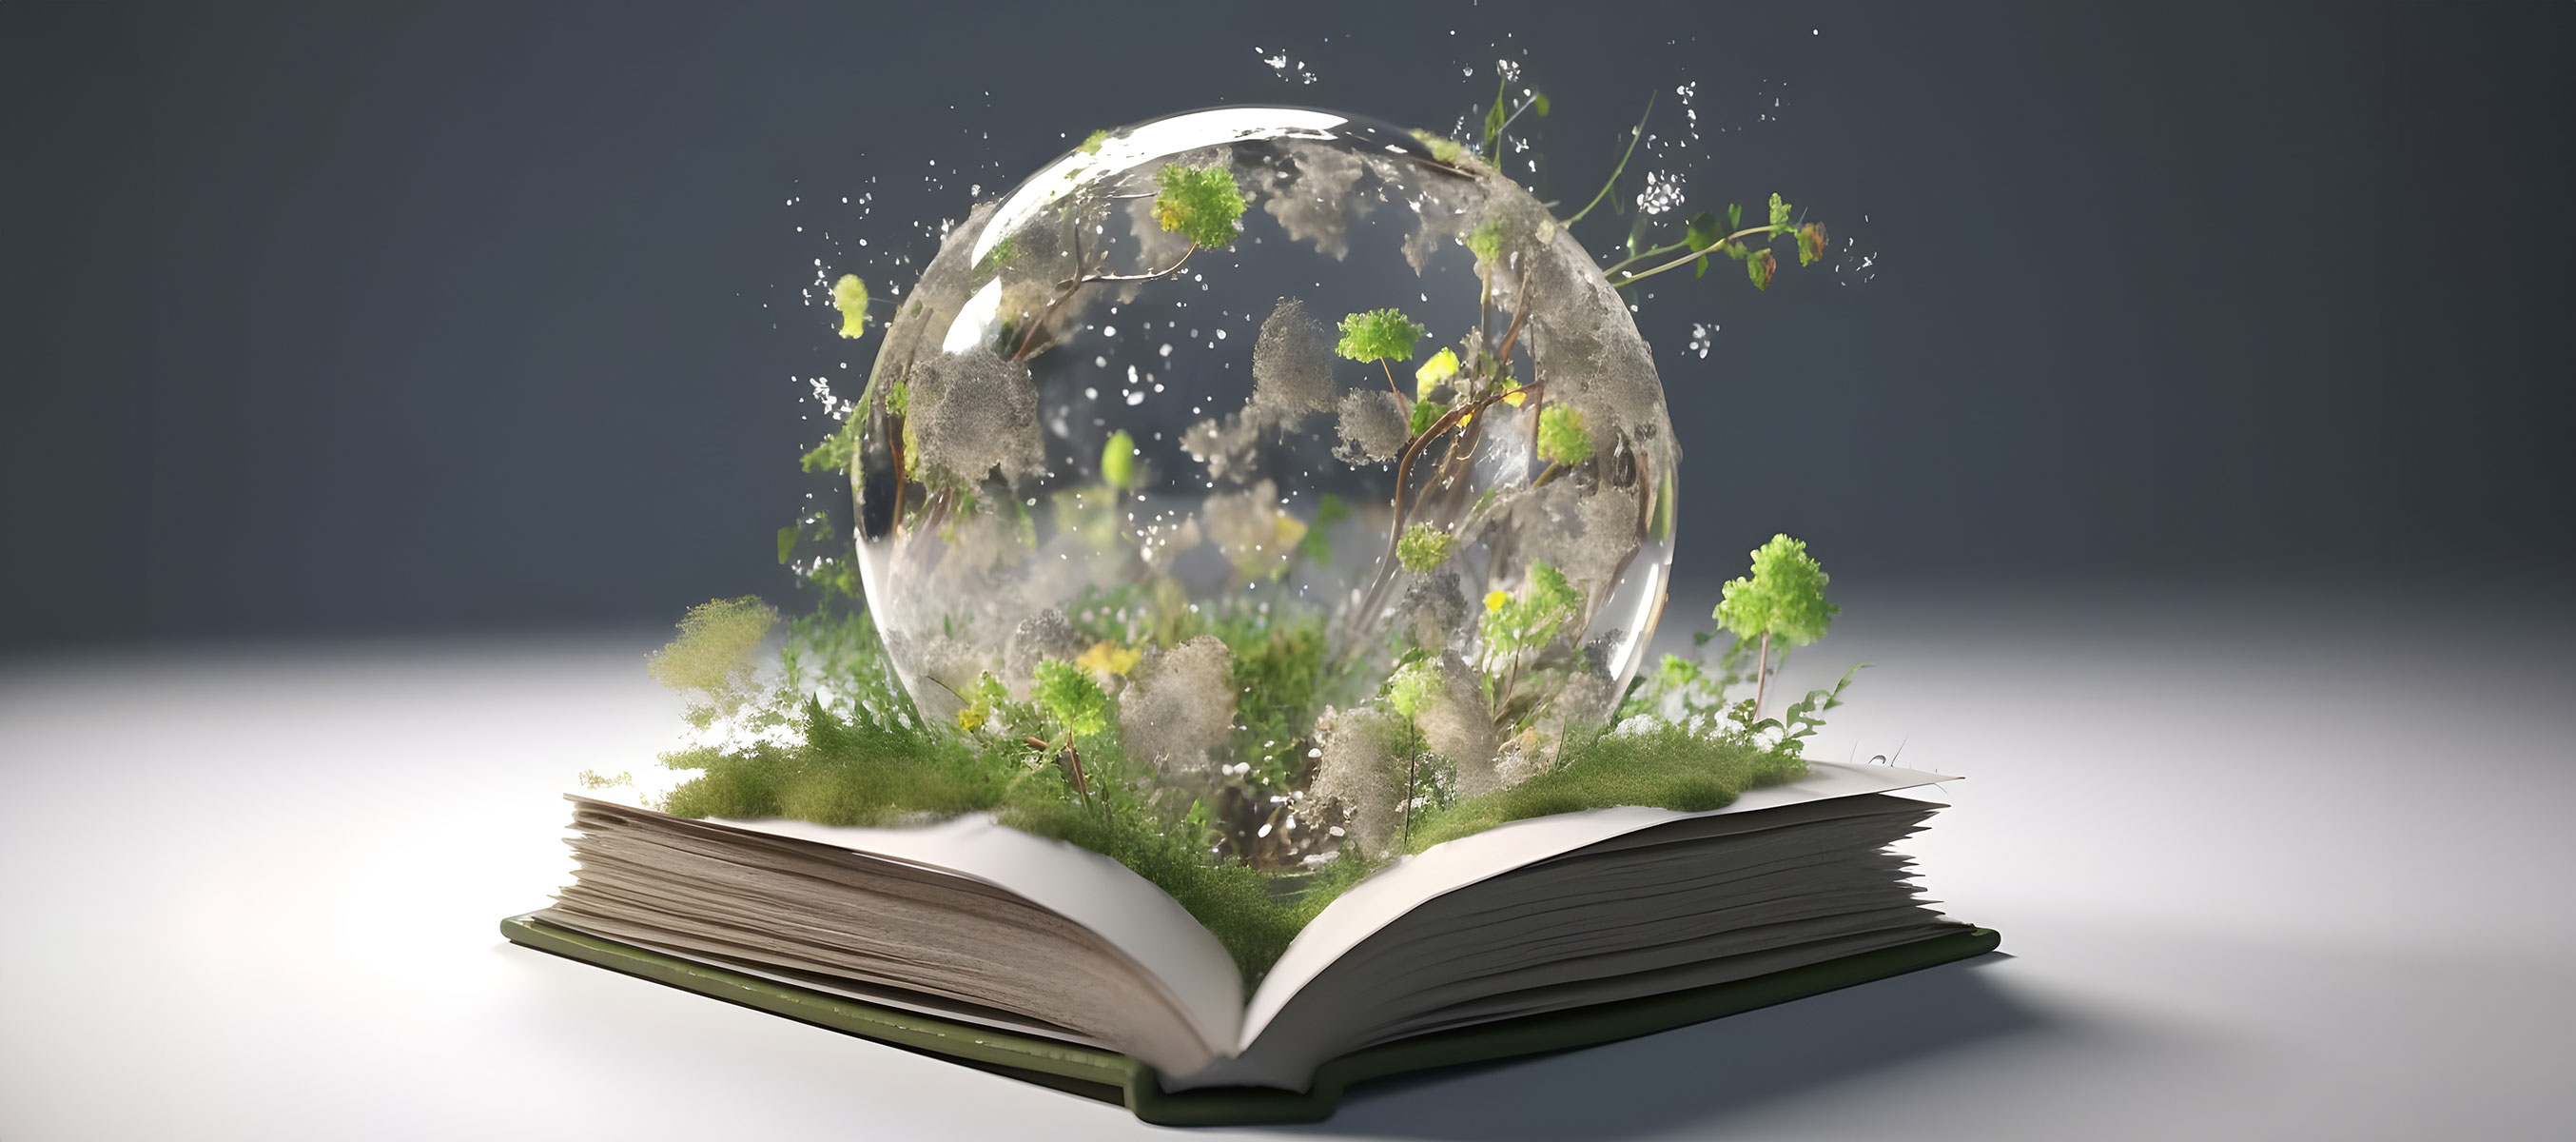 Globe with book and spring greenery